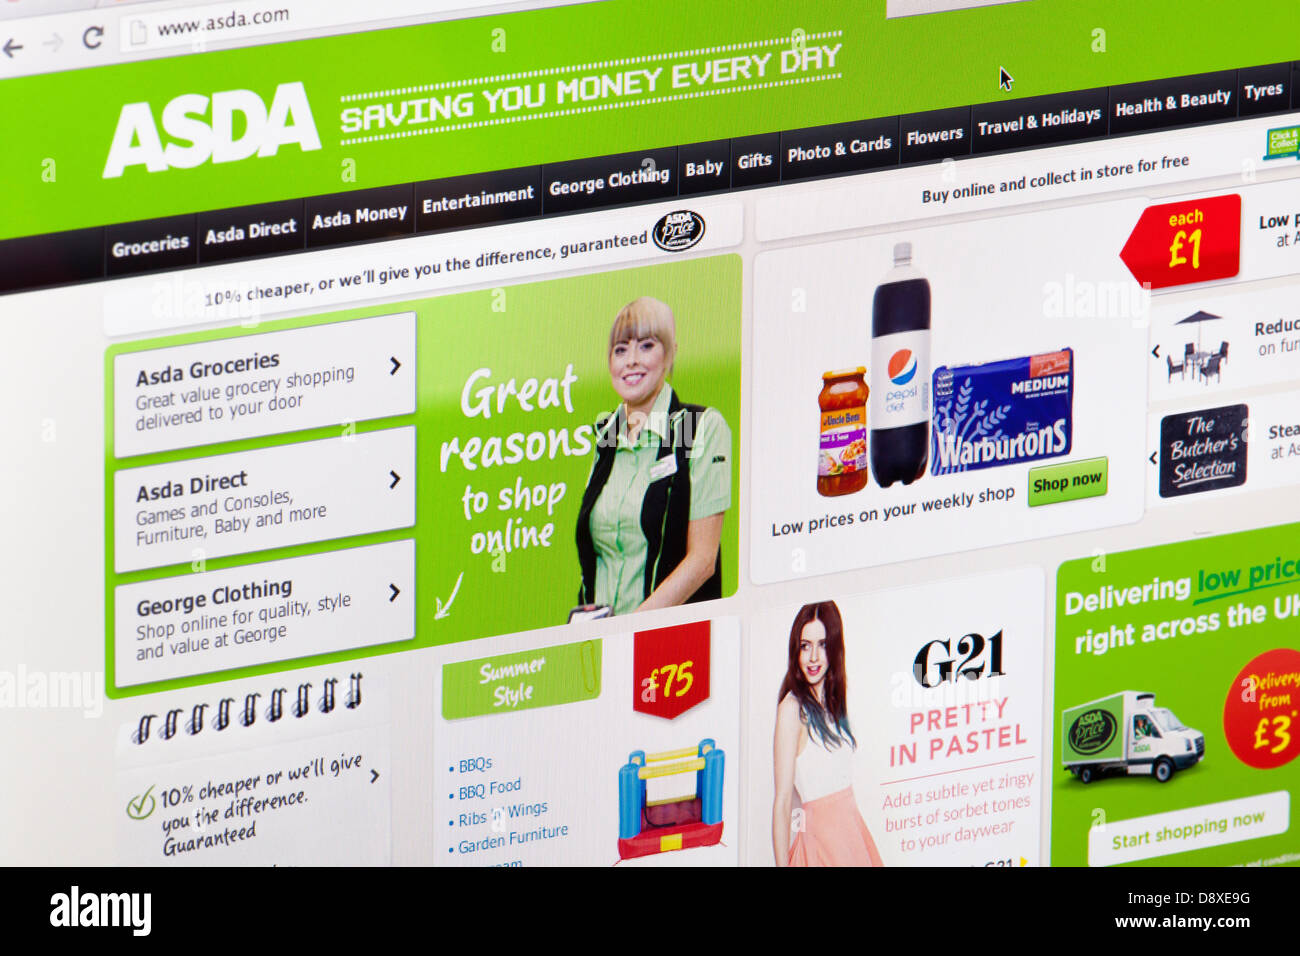 Asda Online Grocery Shopping Website Or Web Page On A Laptop